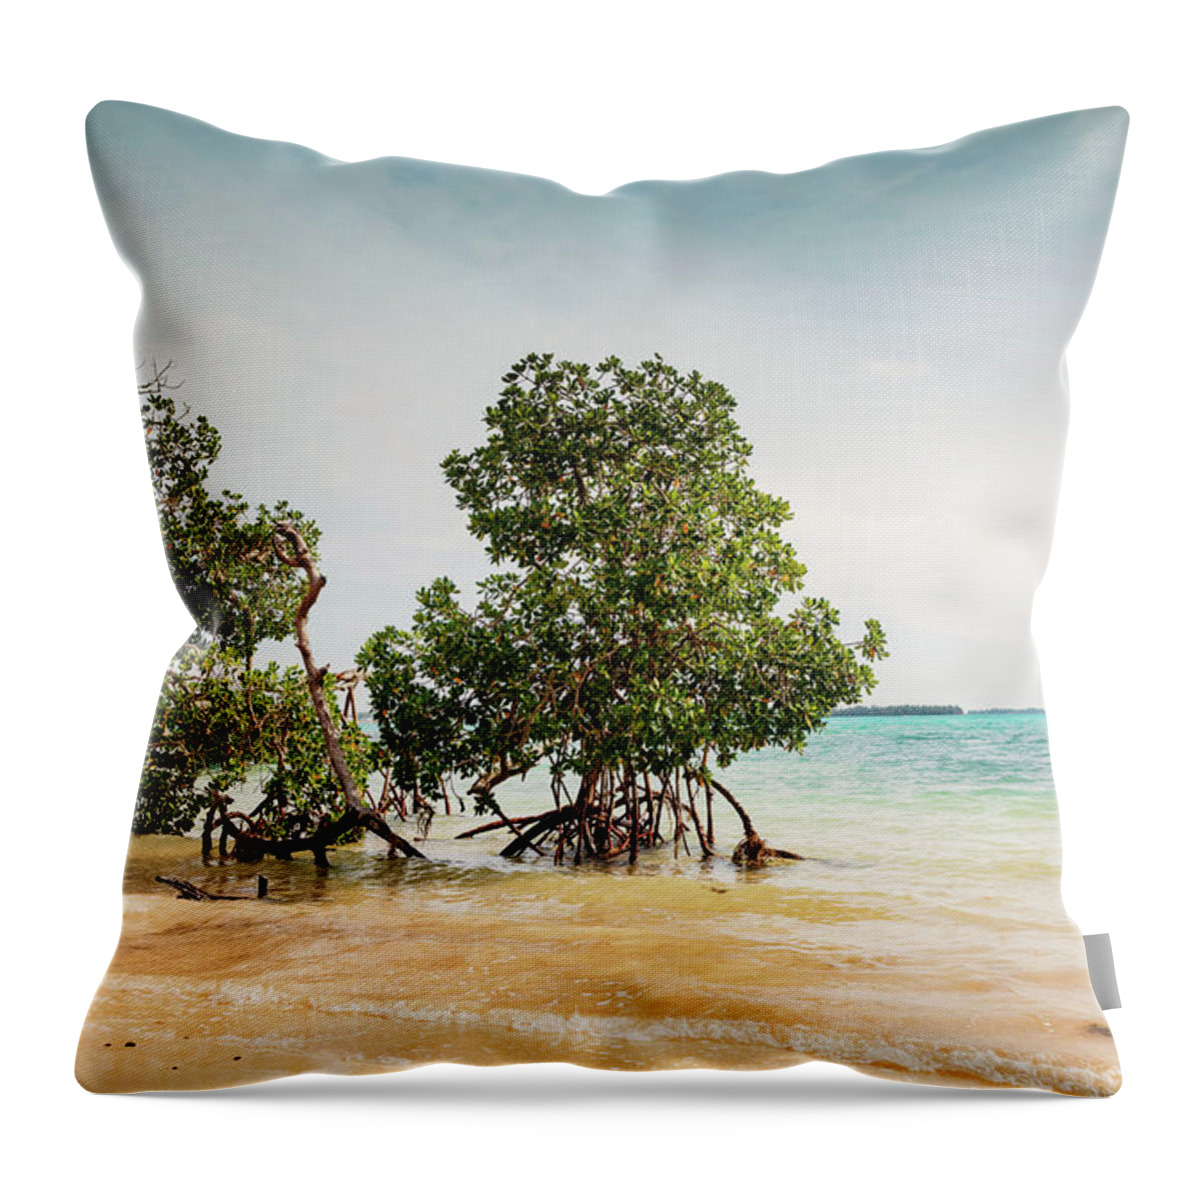 Estock Throw Pillow featuring the digital art Bermuda, Mangroves On Beach At Walsingham Nature Reserve, Blue Hole Park Aka Tom Moore's Jungle by Lumiere